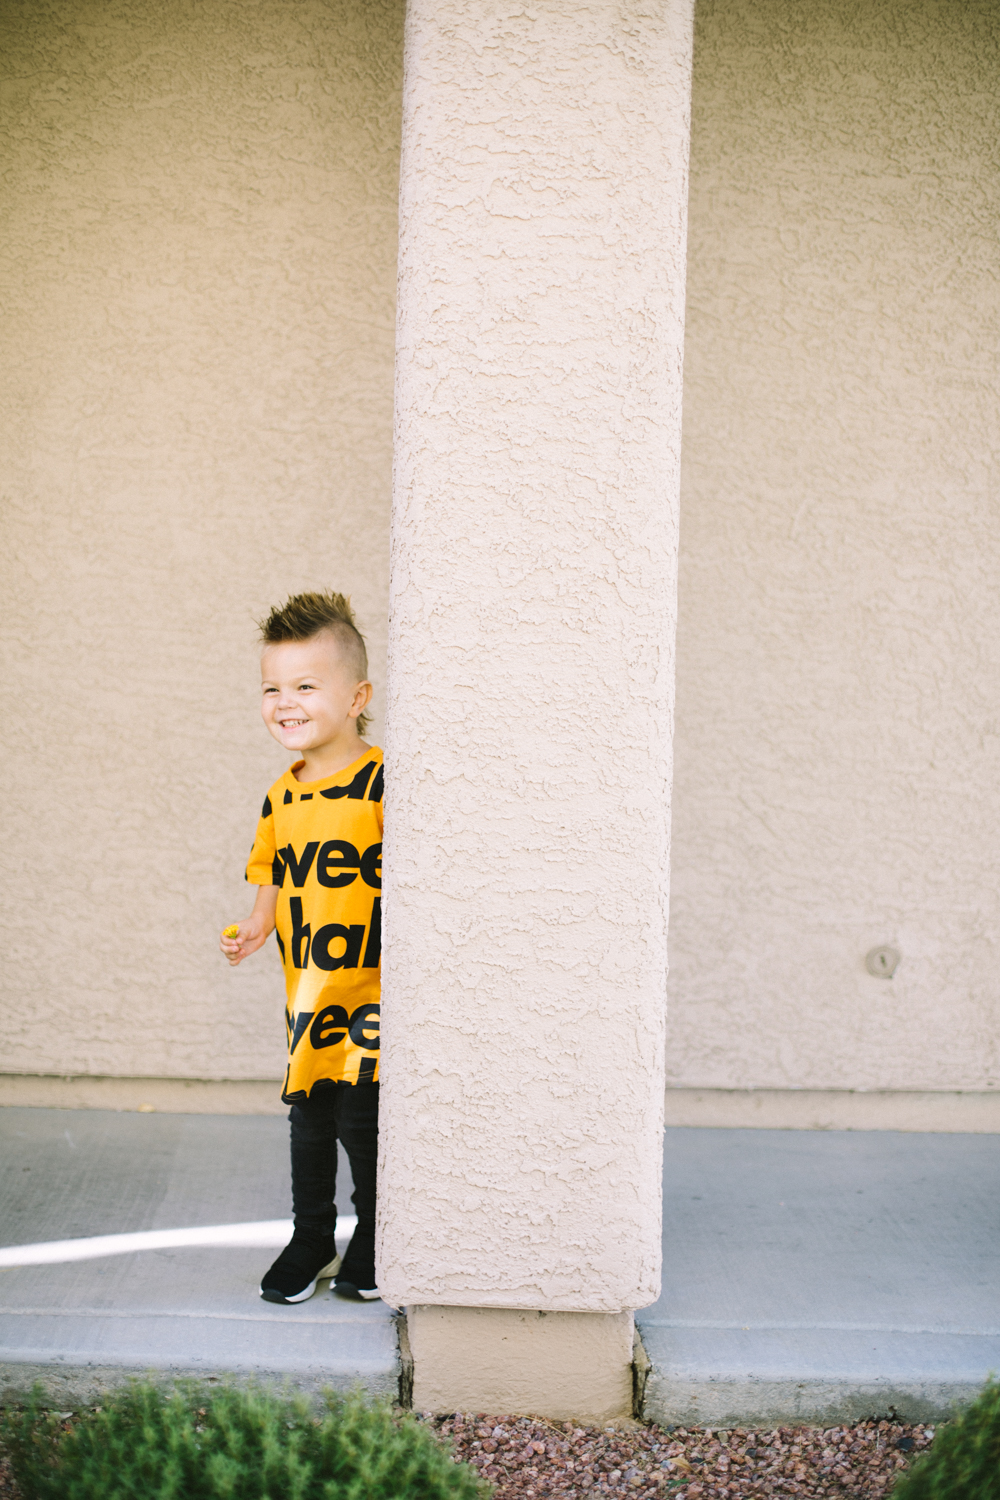 Cute Target Halloween Clothing for Kids featured by popular Las Vegas life and style bloggers, Life of a Sister